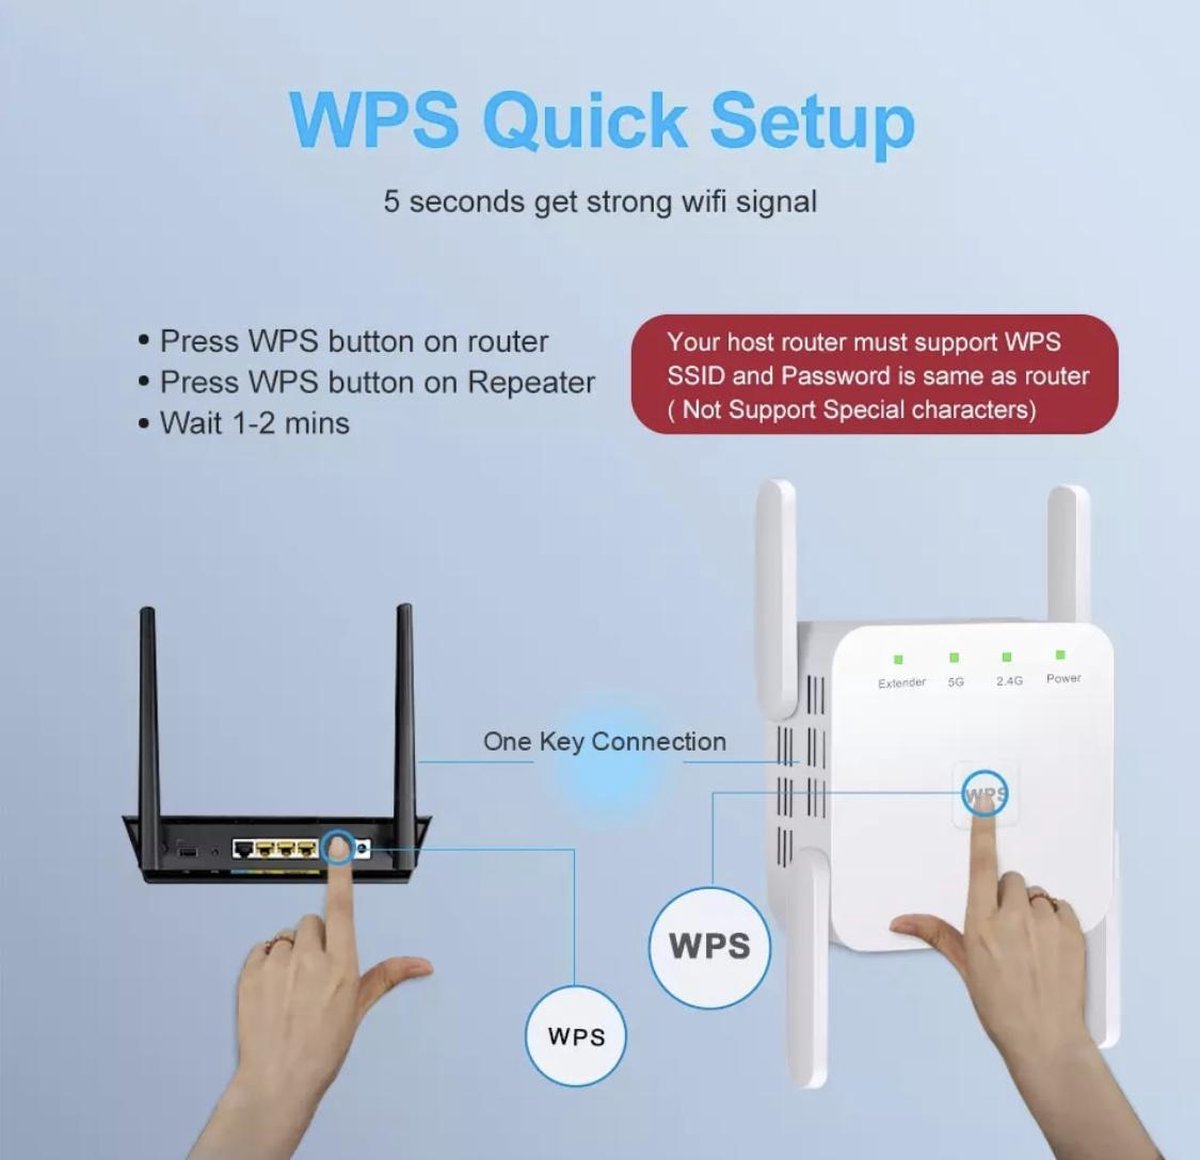 Dualband 5G WiFi Repeater 1200 Mbps - Afstand Wi-Fi Signaalversterker bol.com